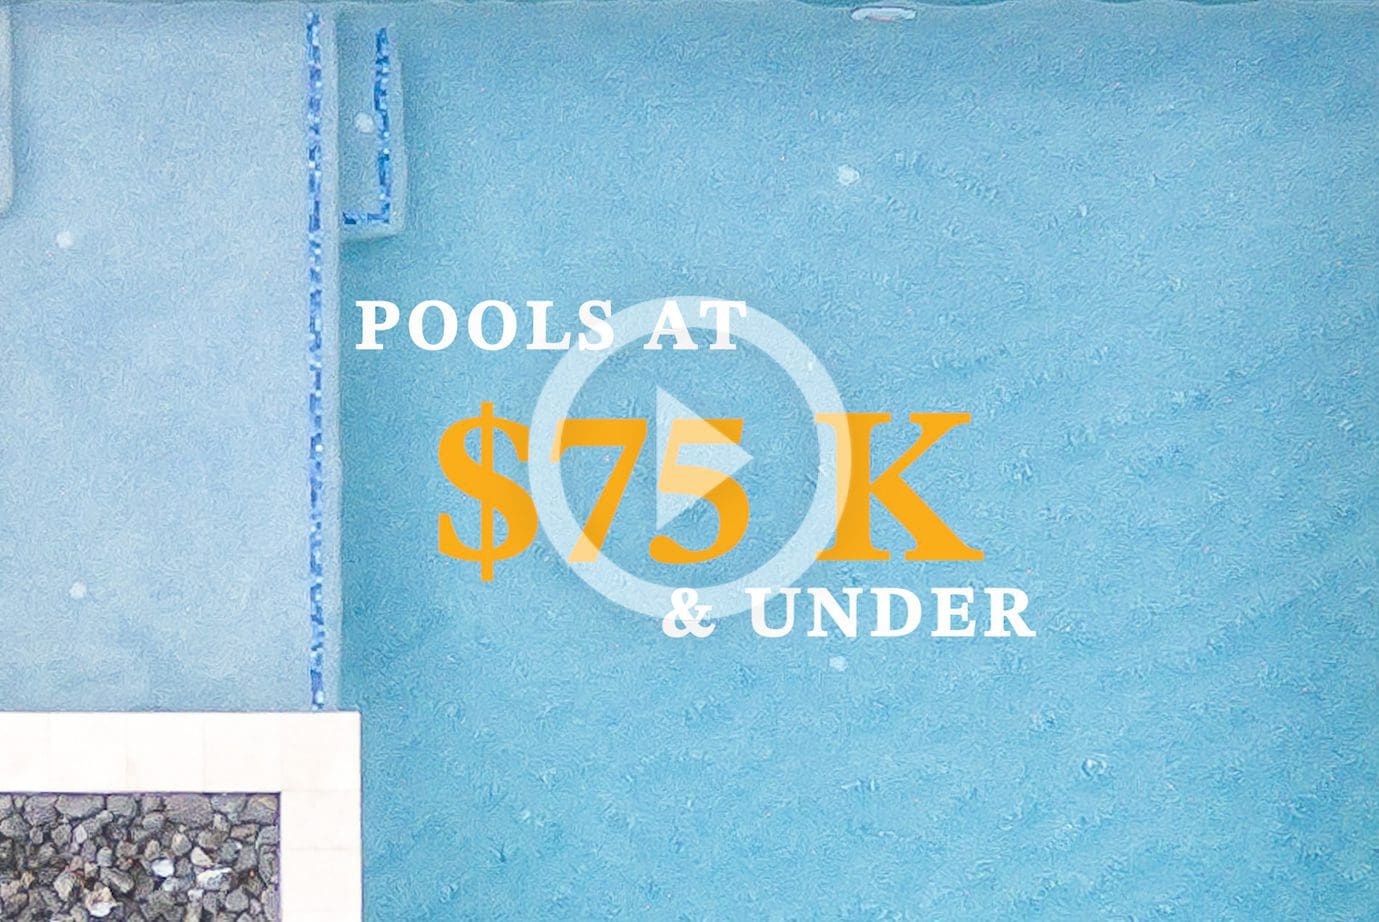 What Type Of Pool Can I Get If My Budget Is $75 K & Under?